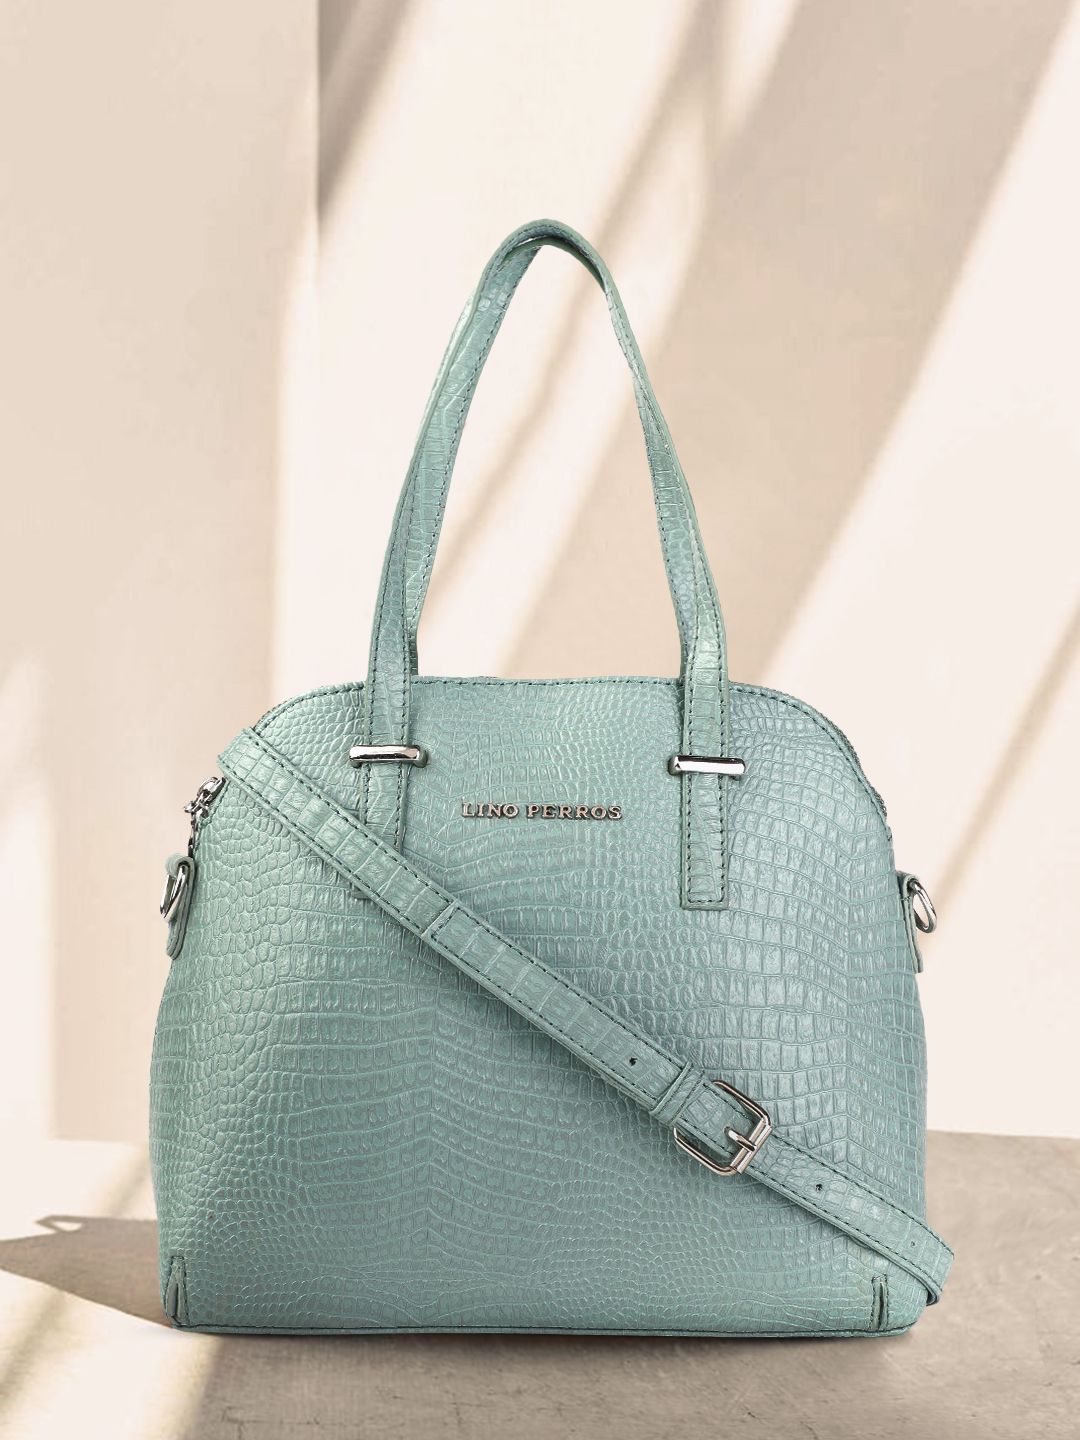 Lino Perros Sea Green Snakeskin Textured PU Structured Handheld Bag Price in India